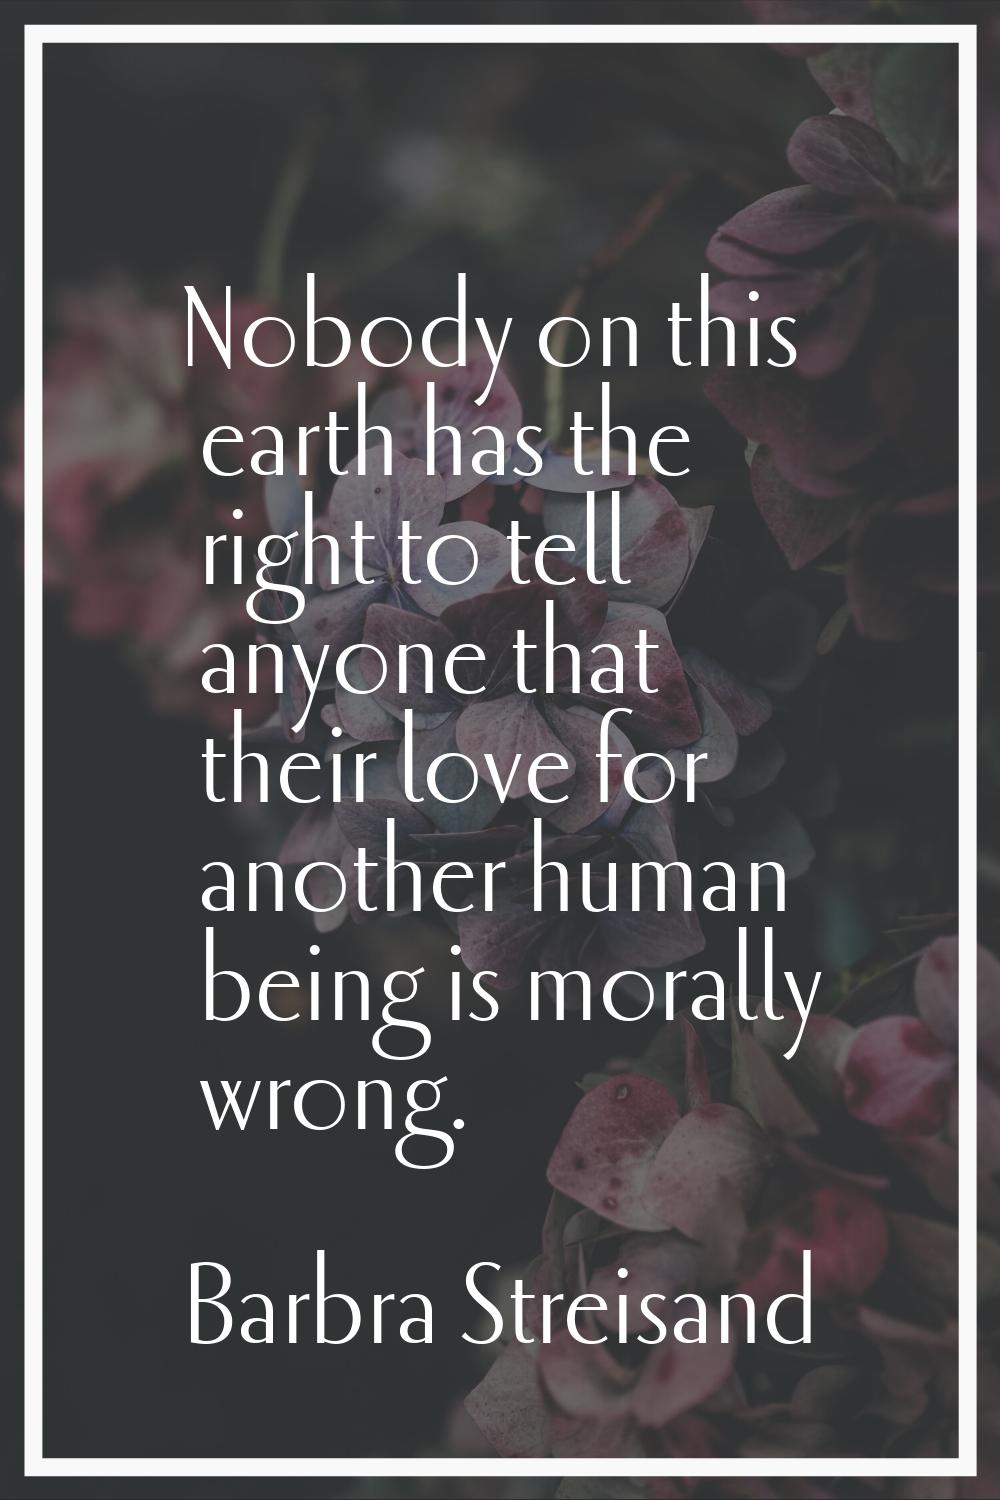 Nobody on this earth has the right to tell anyone that their love for another human being is morall